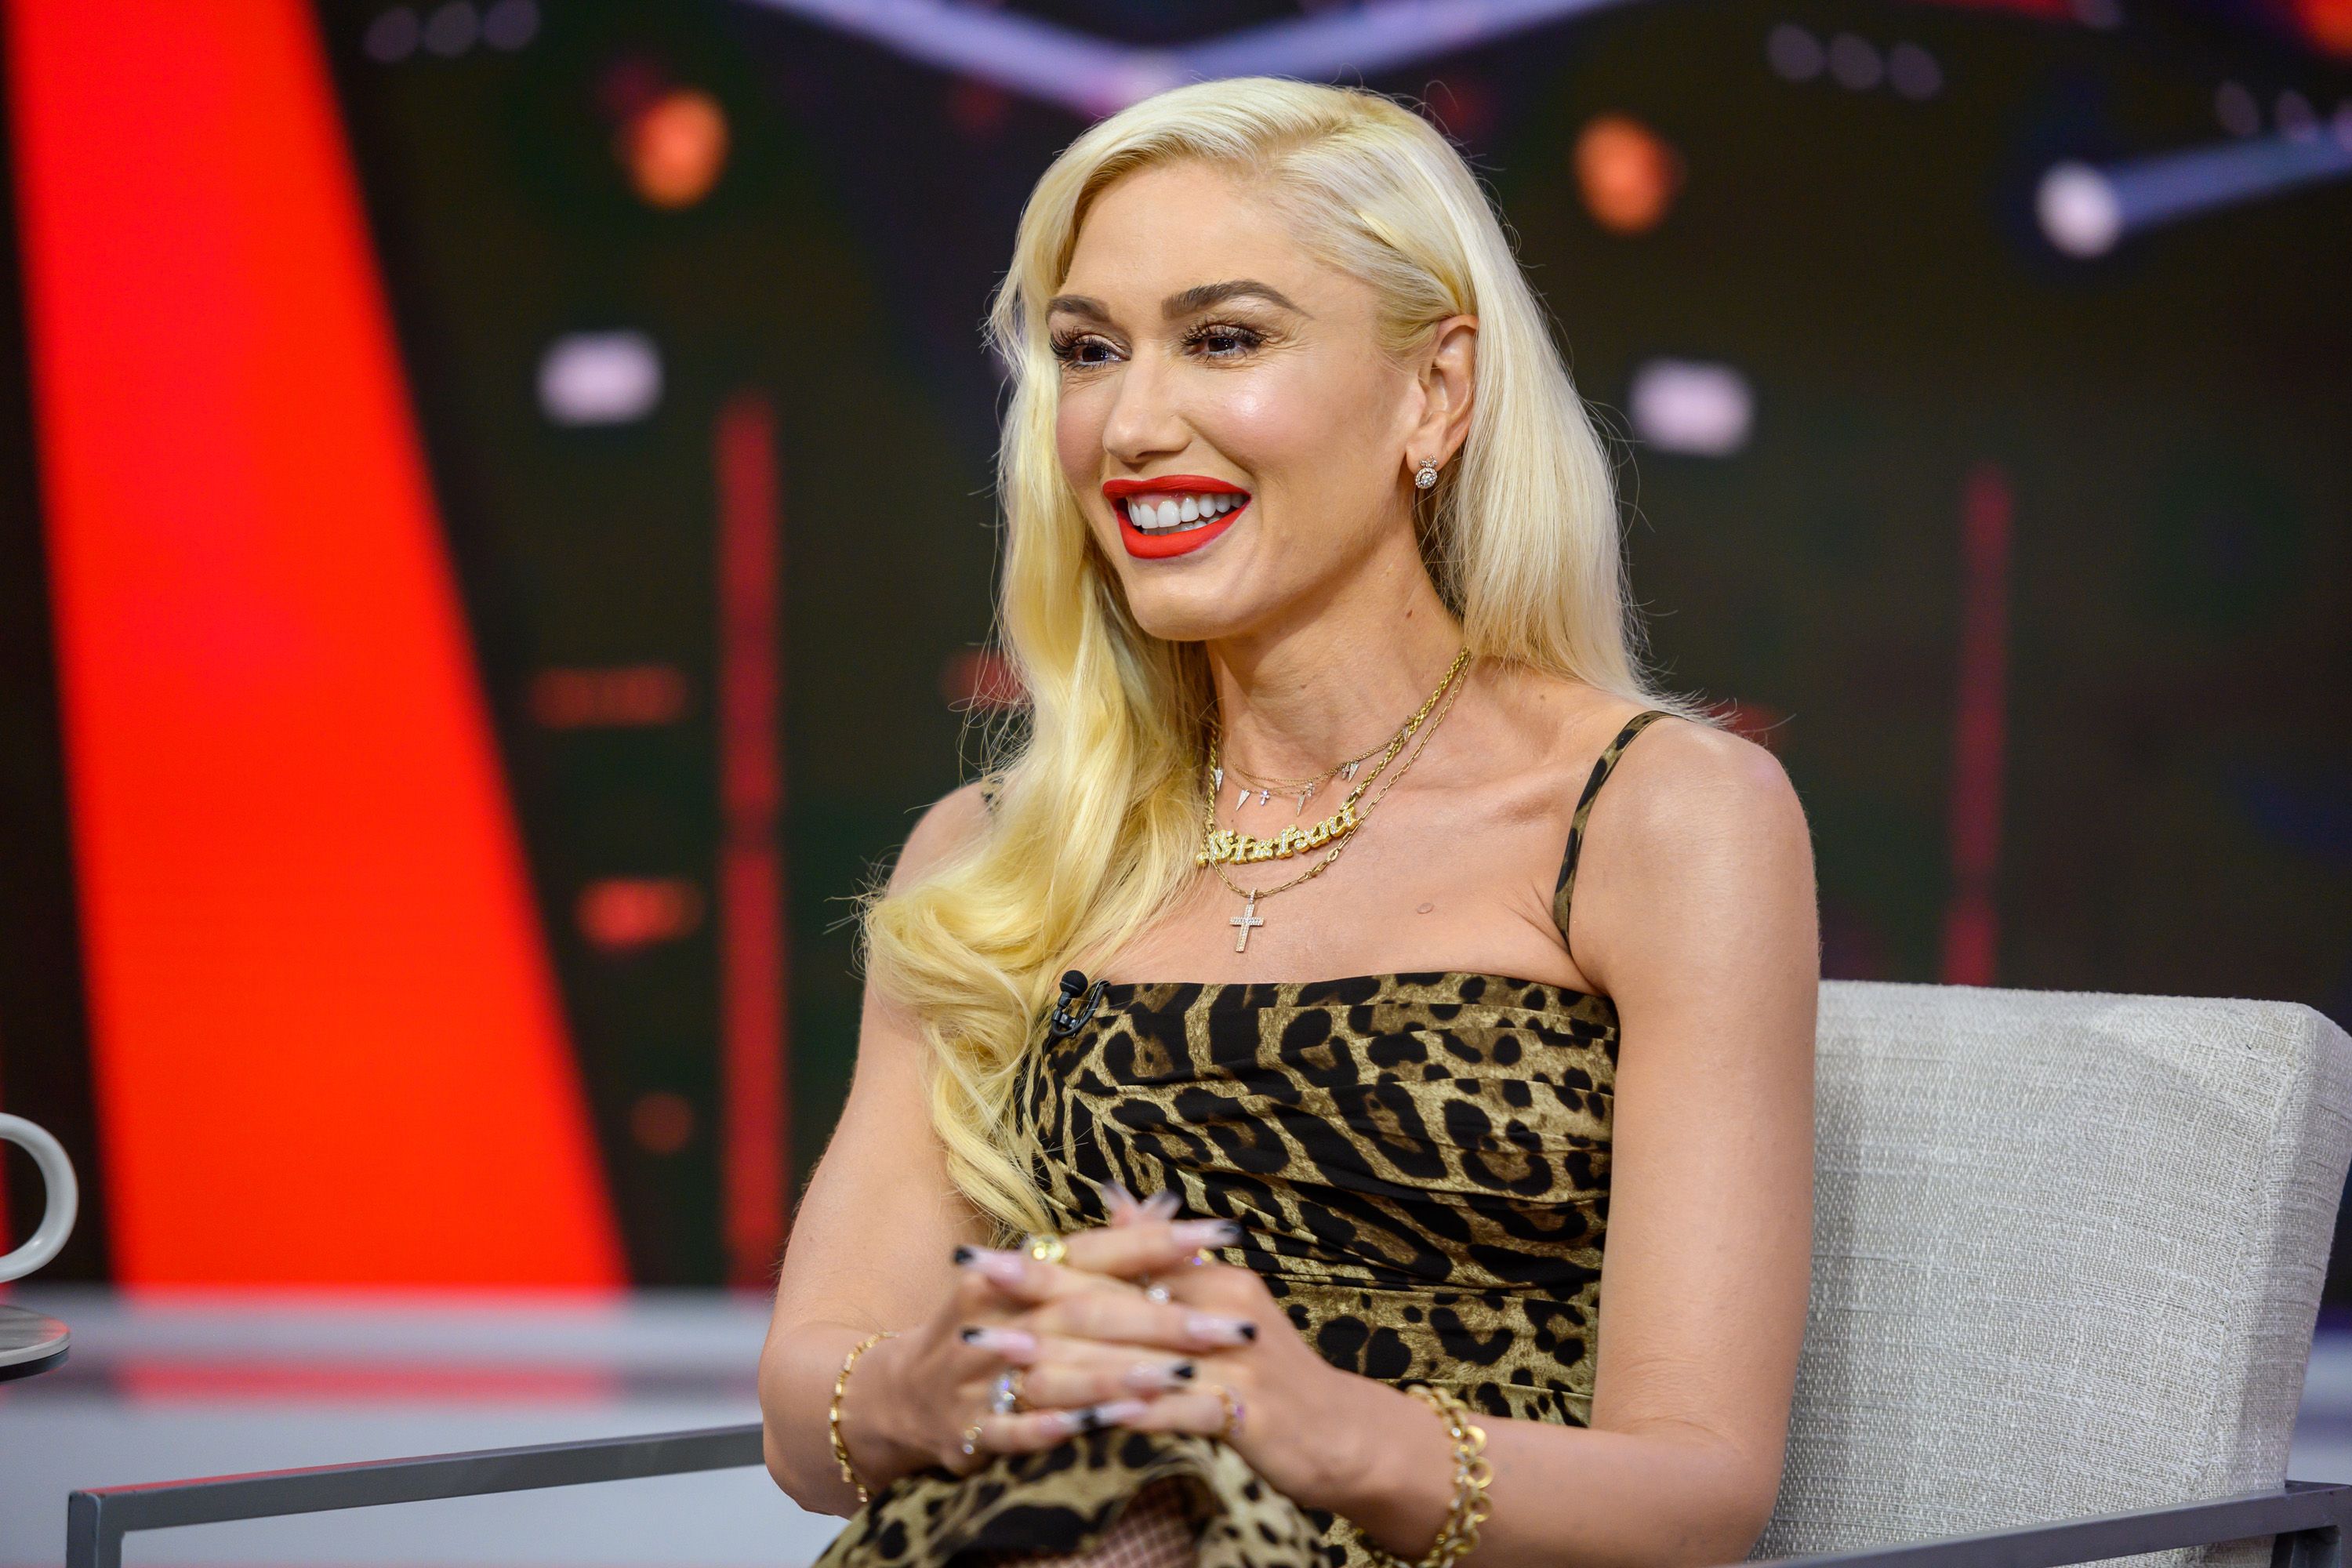 Gwen Stefani on the set of the "Today" show on September 23, 2019 | Photo: Getty Images